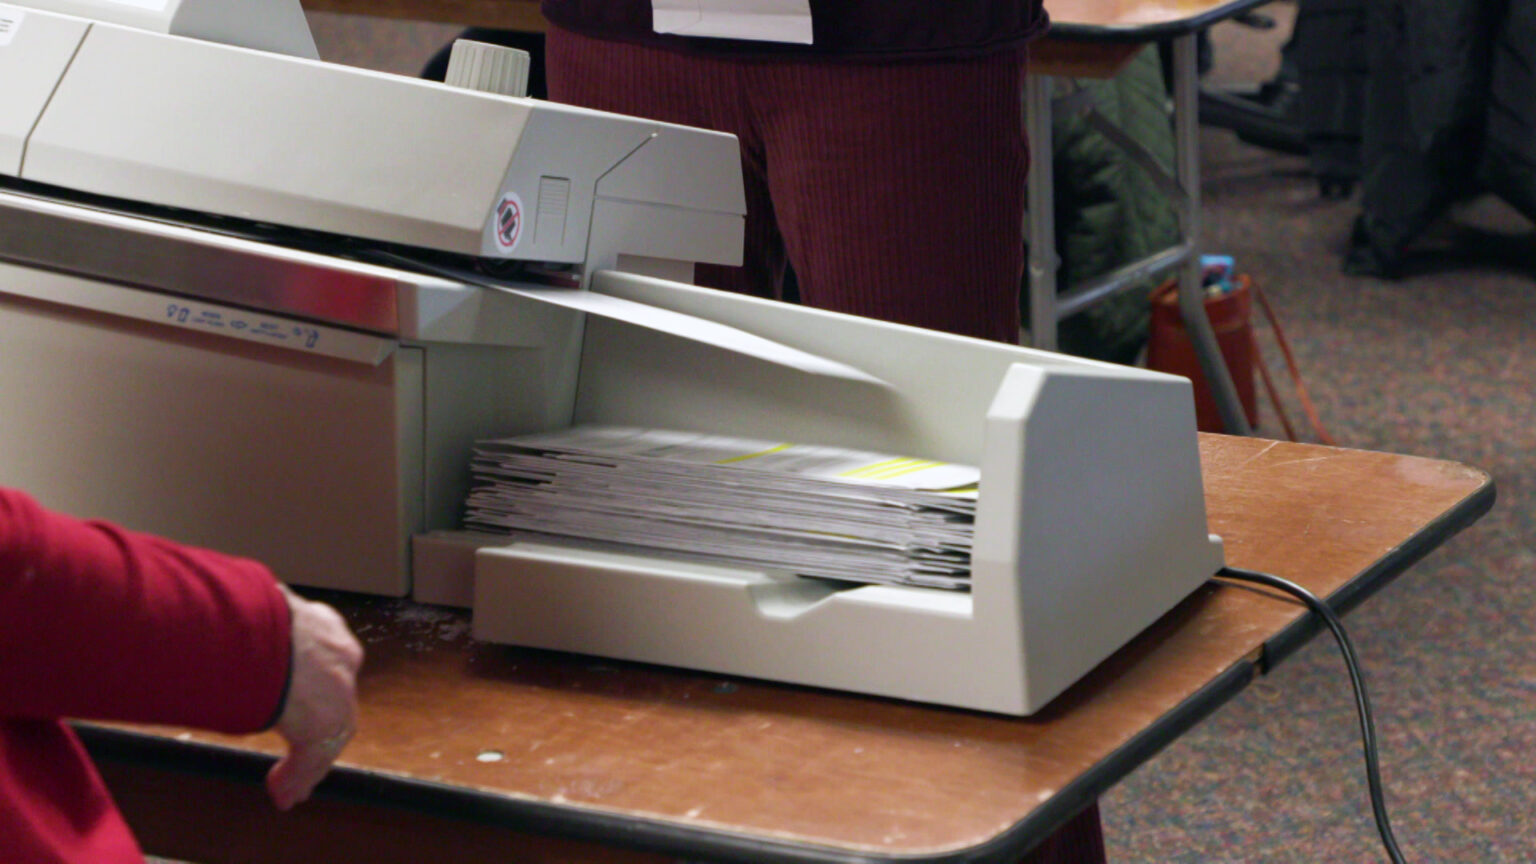 Absentee ballot envelopes are processed by an envelope-opening machine set on a folding table in a carpeted room.